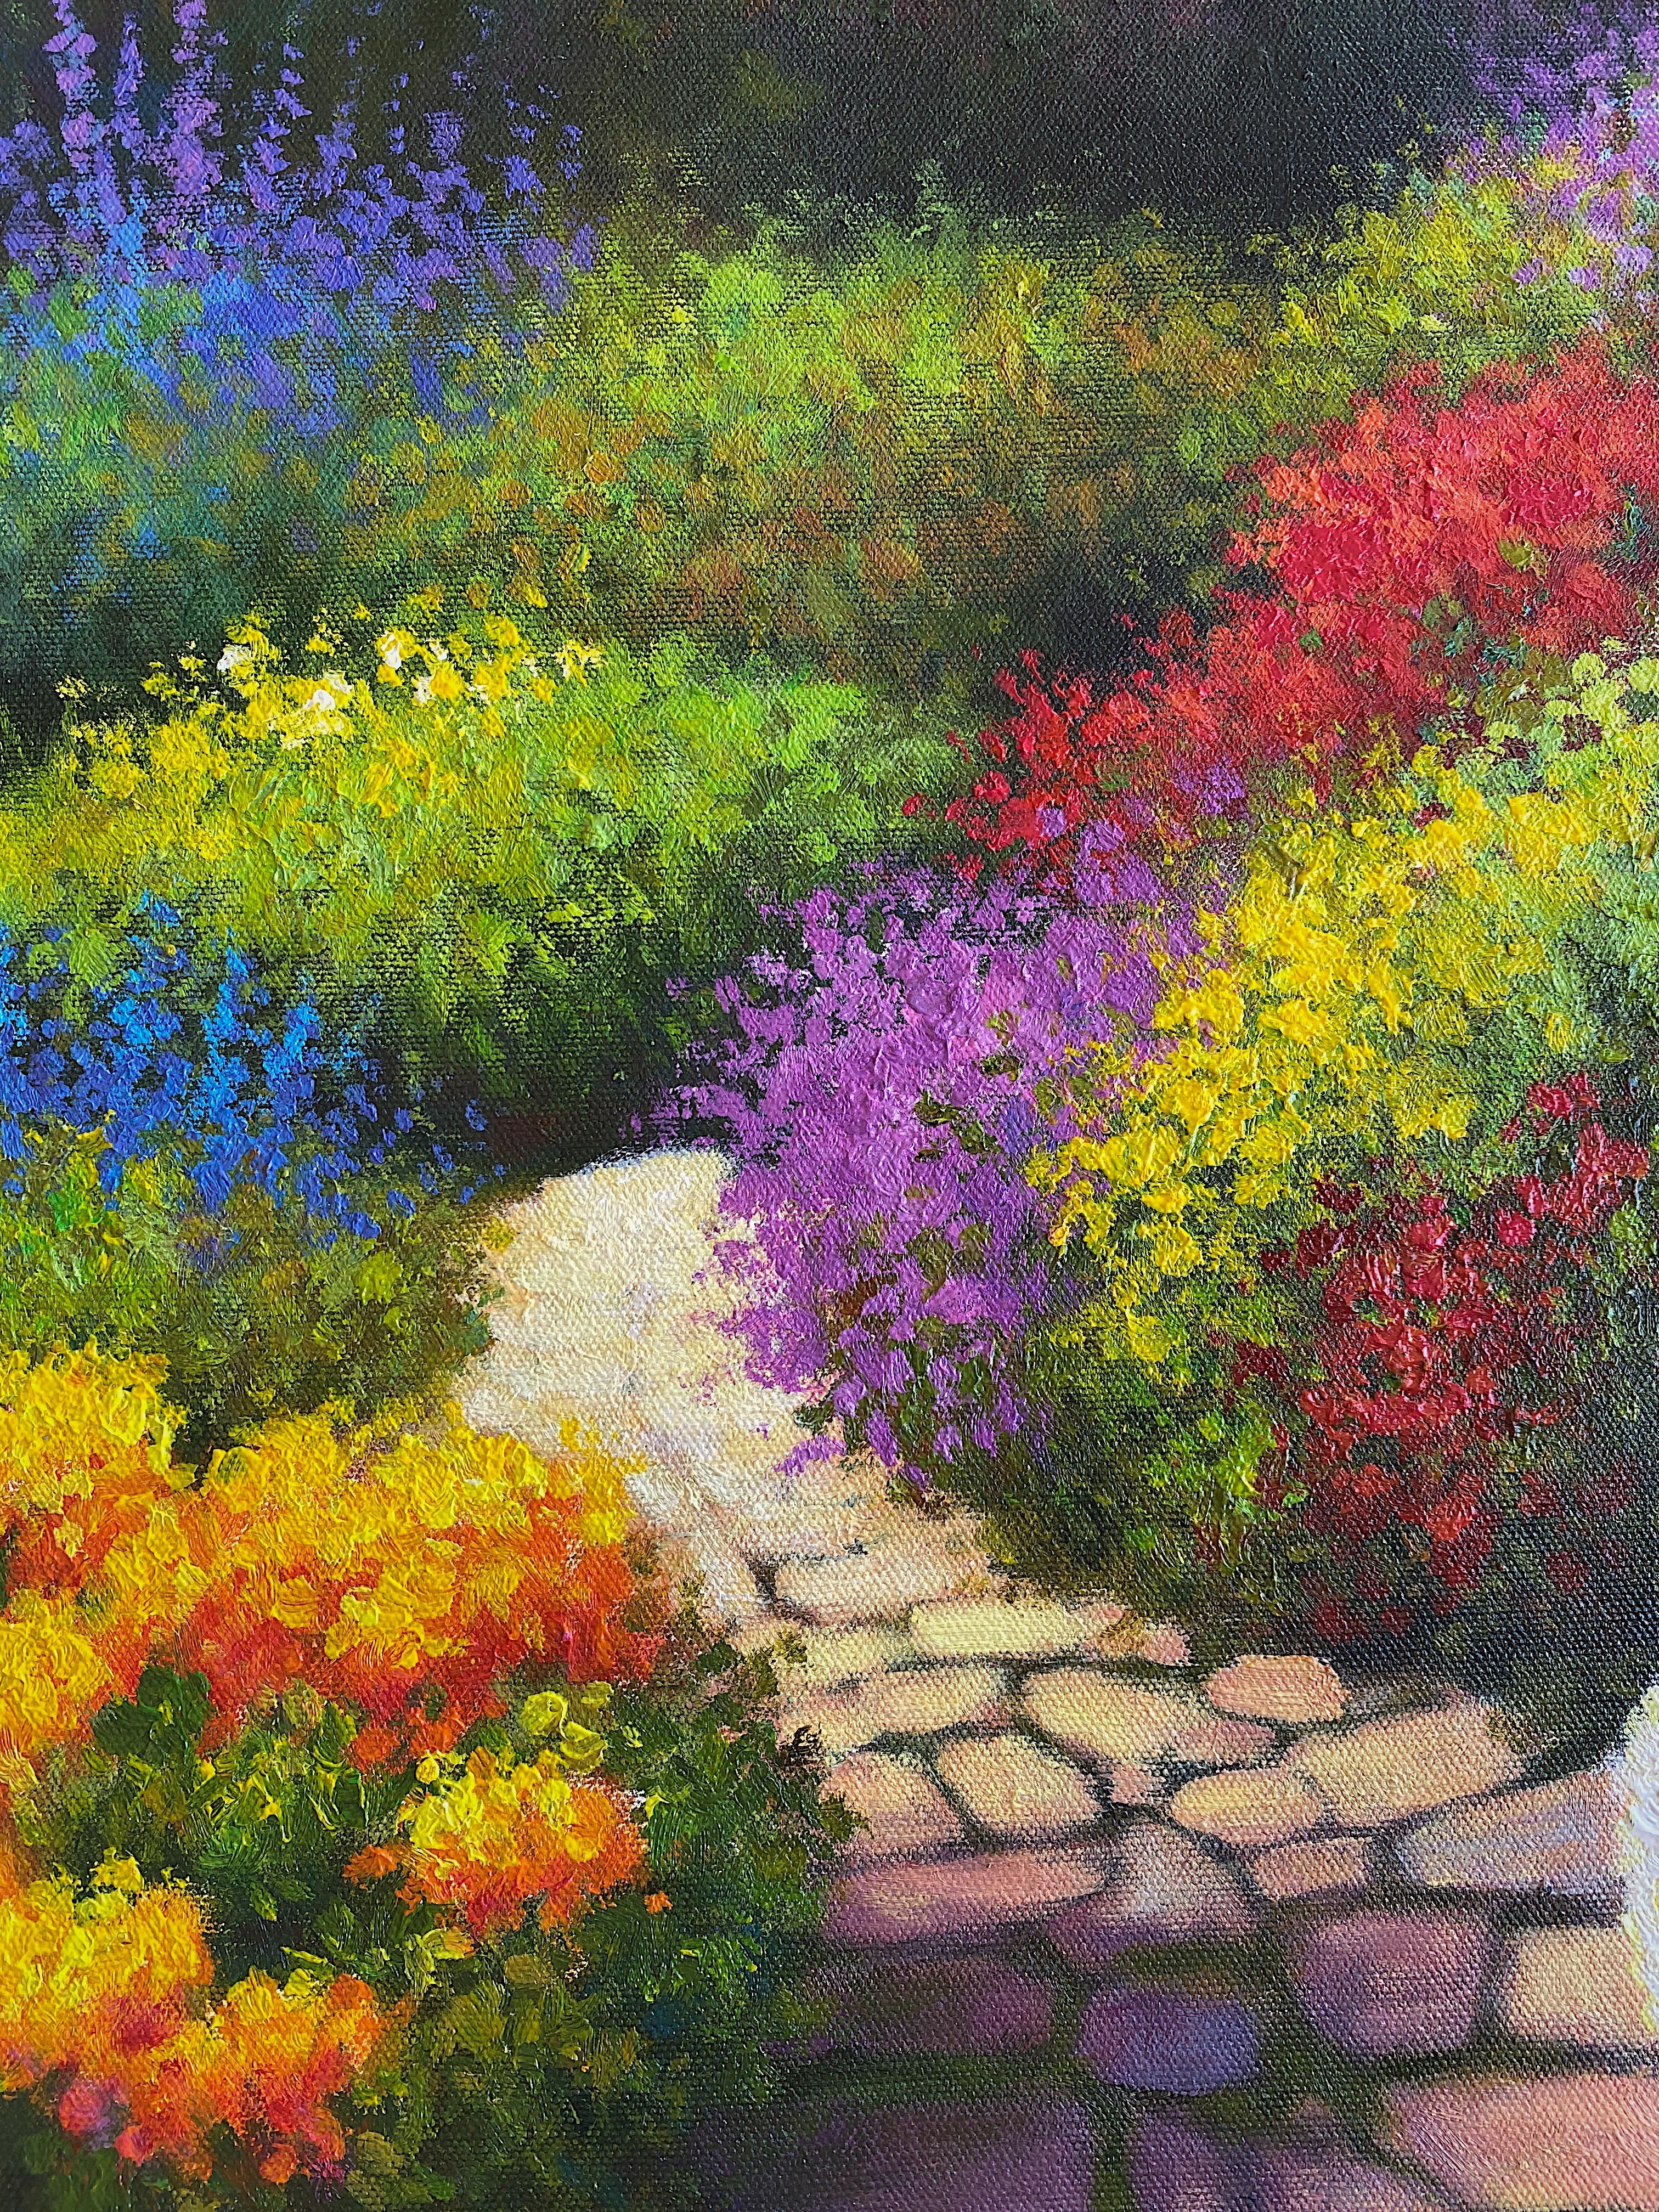 Spring garden - Acrylic oil painting - Painting by Sonco Carrasco